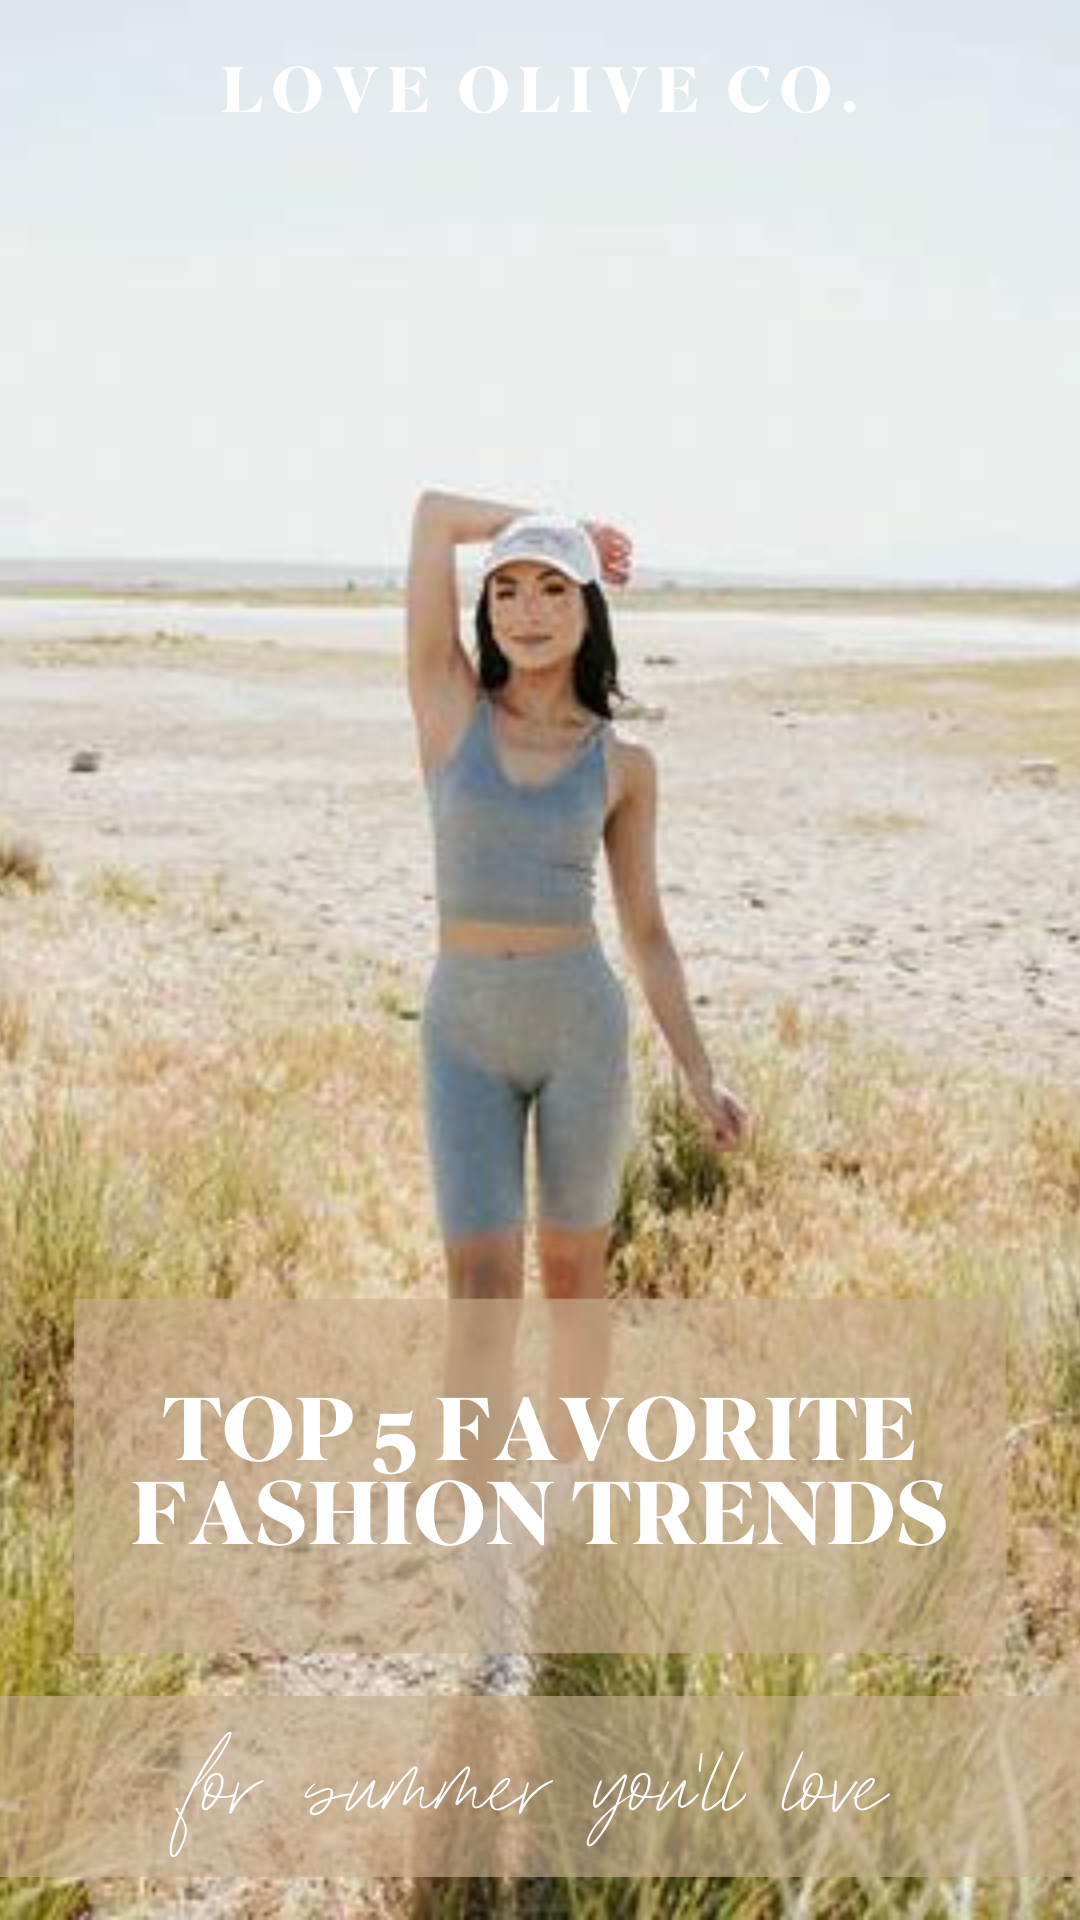 top 5 favorite fashion trends for summer. www.loveoliveco.com